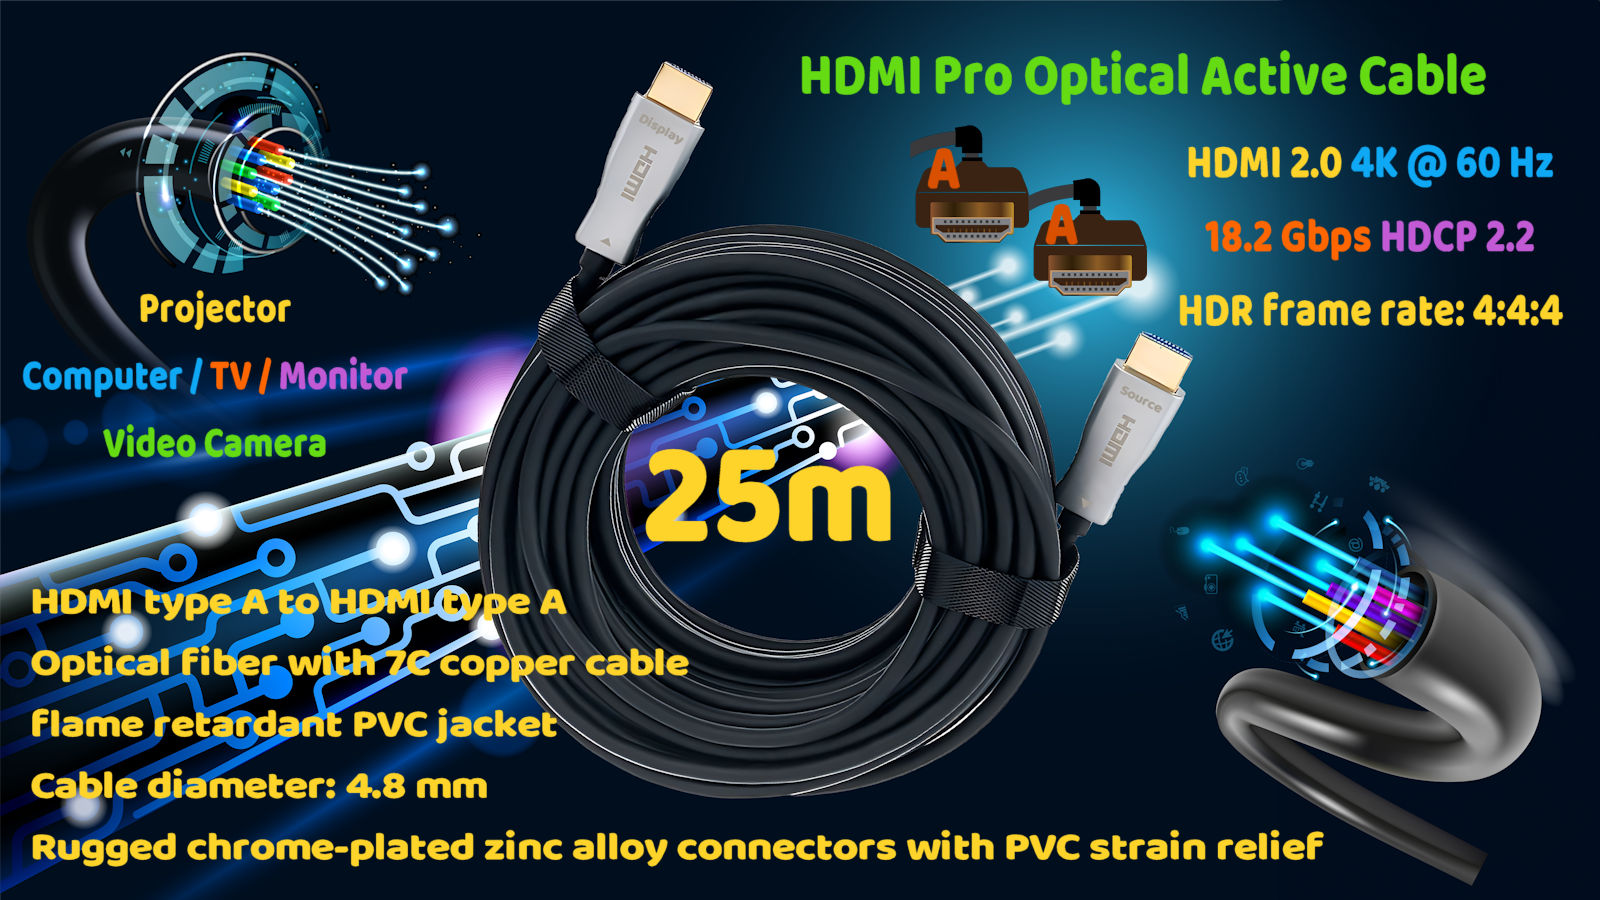 HDMI Pro Optical Active Cable 4K 18.2Gbps 25m A-A